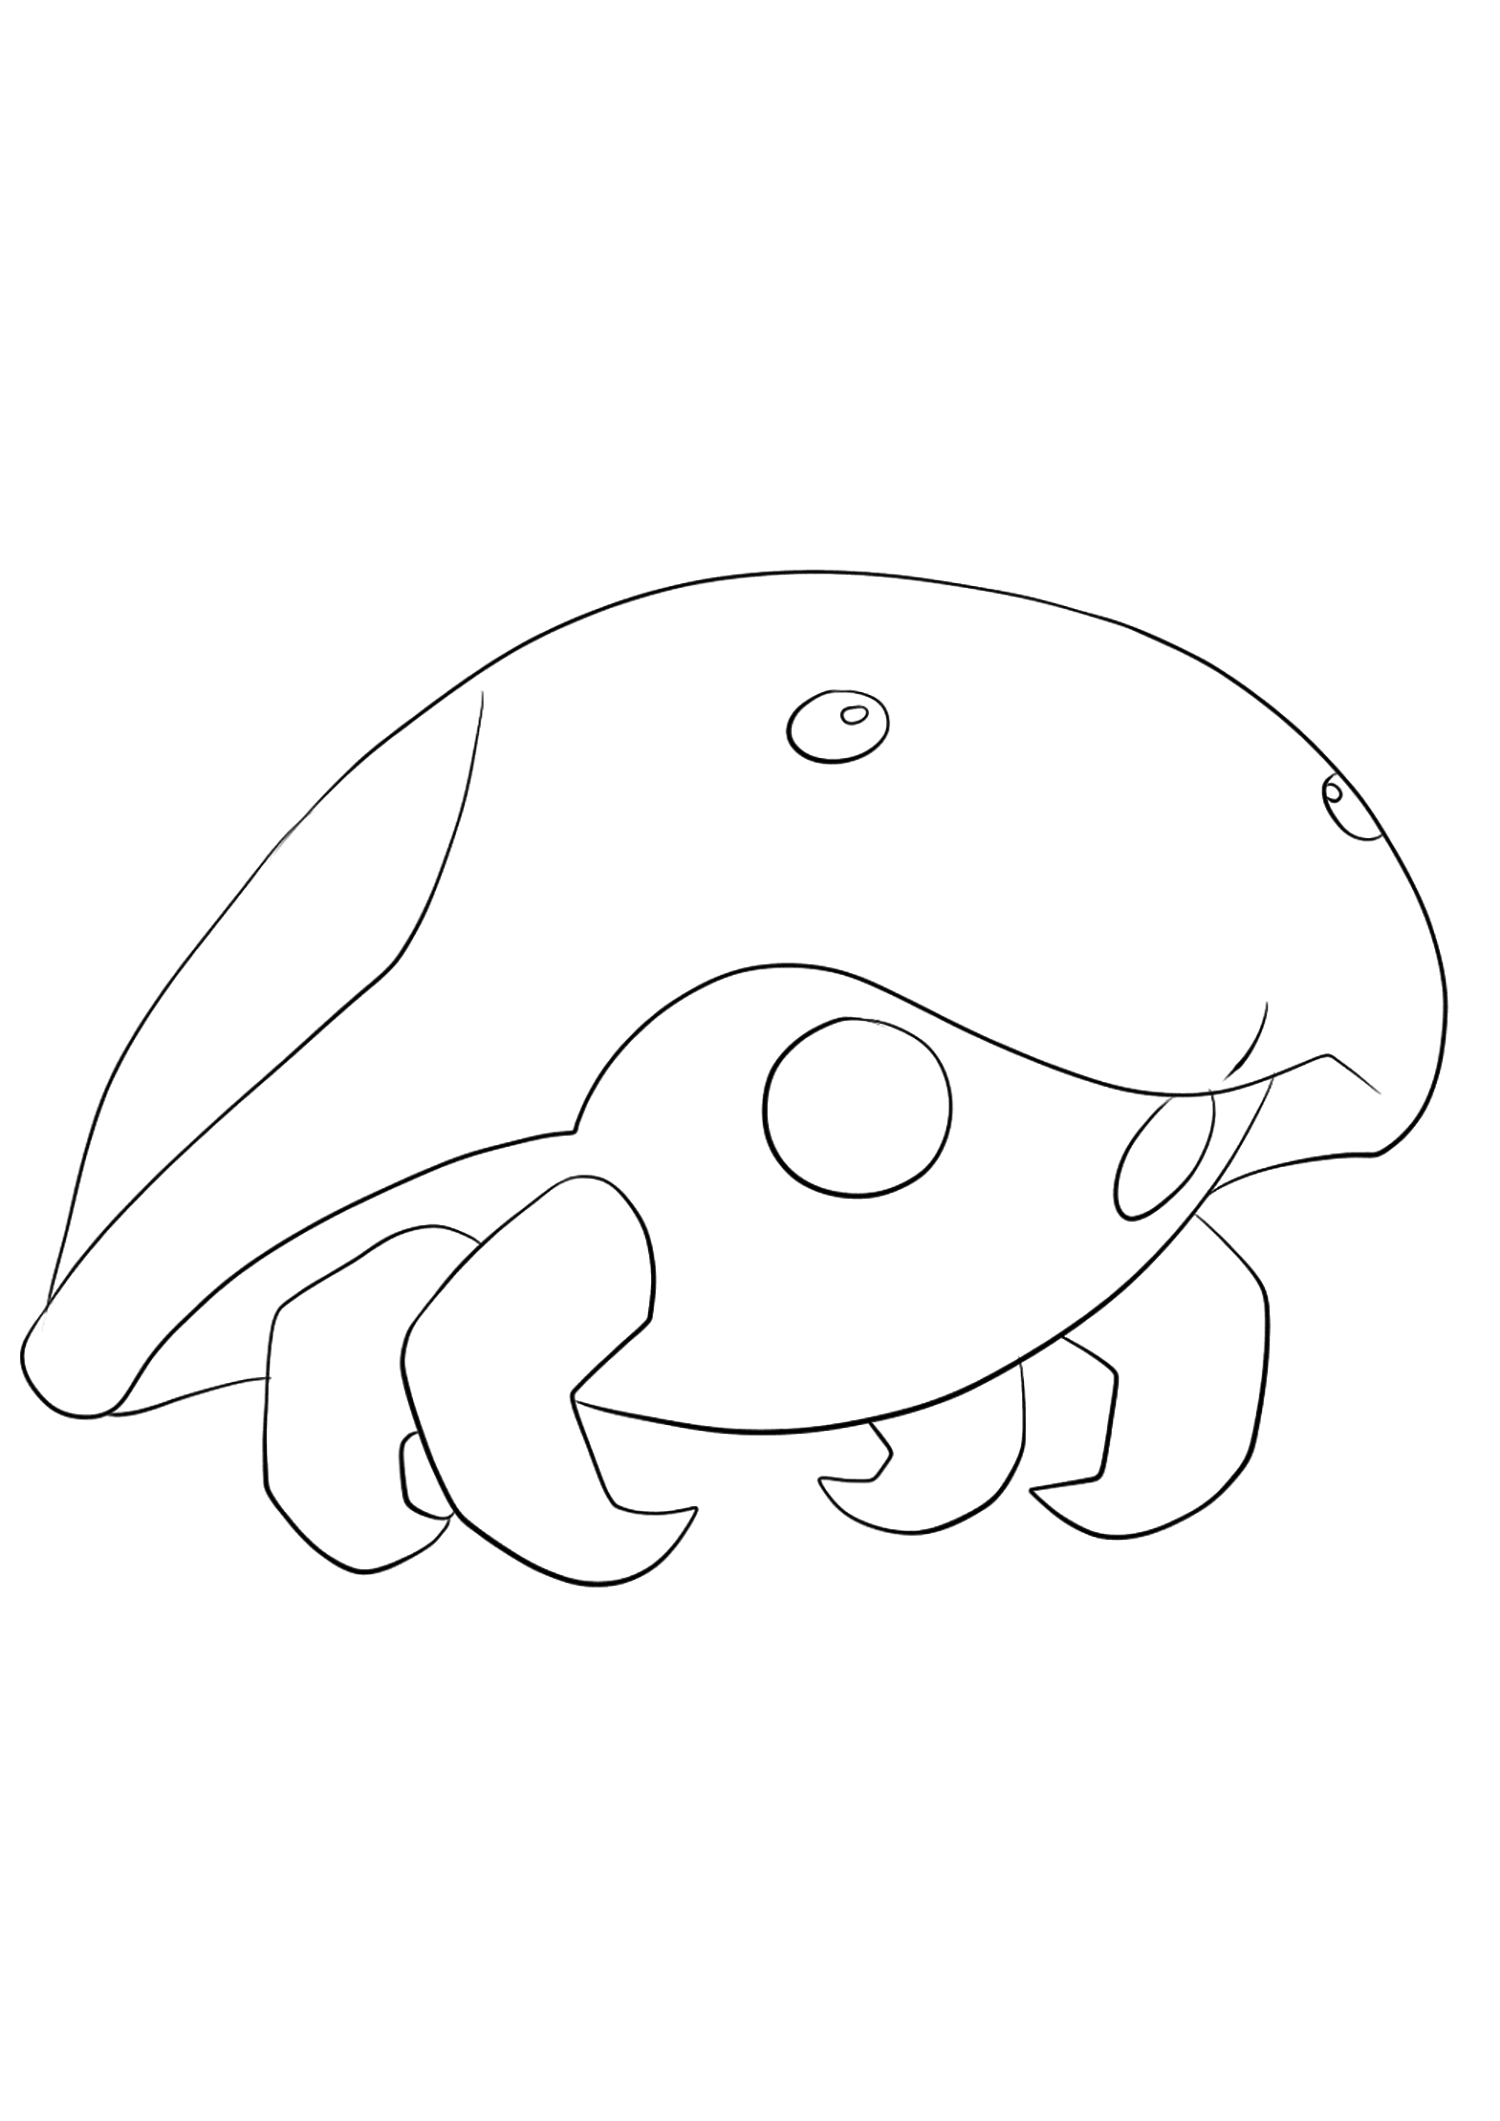 Kabuto (No.140). Kabuto Coloring page, Generation I Pokemon of type Rock and WaterOriginal image credit: Pokemon linearts by Lilly Gerbil on Deviantart.Permission:  All rights reserved © Pokemon company and Ken Sugimori.